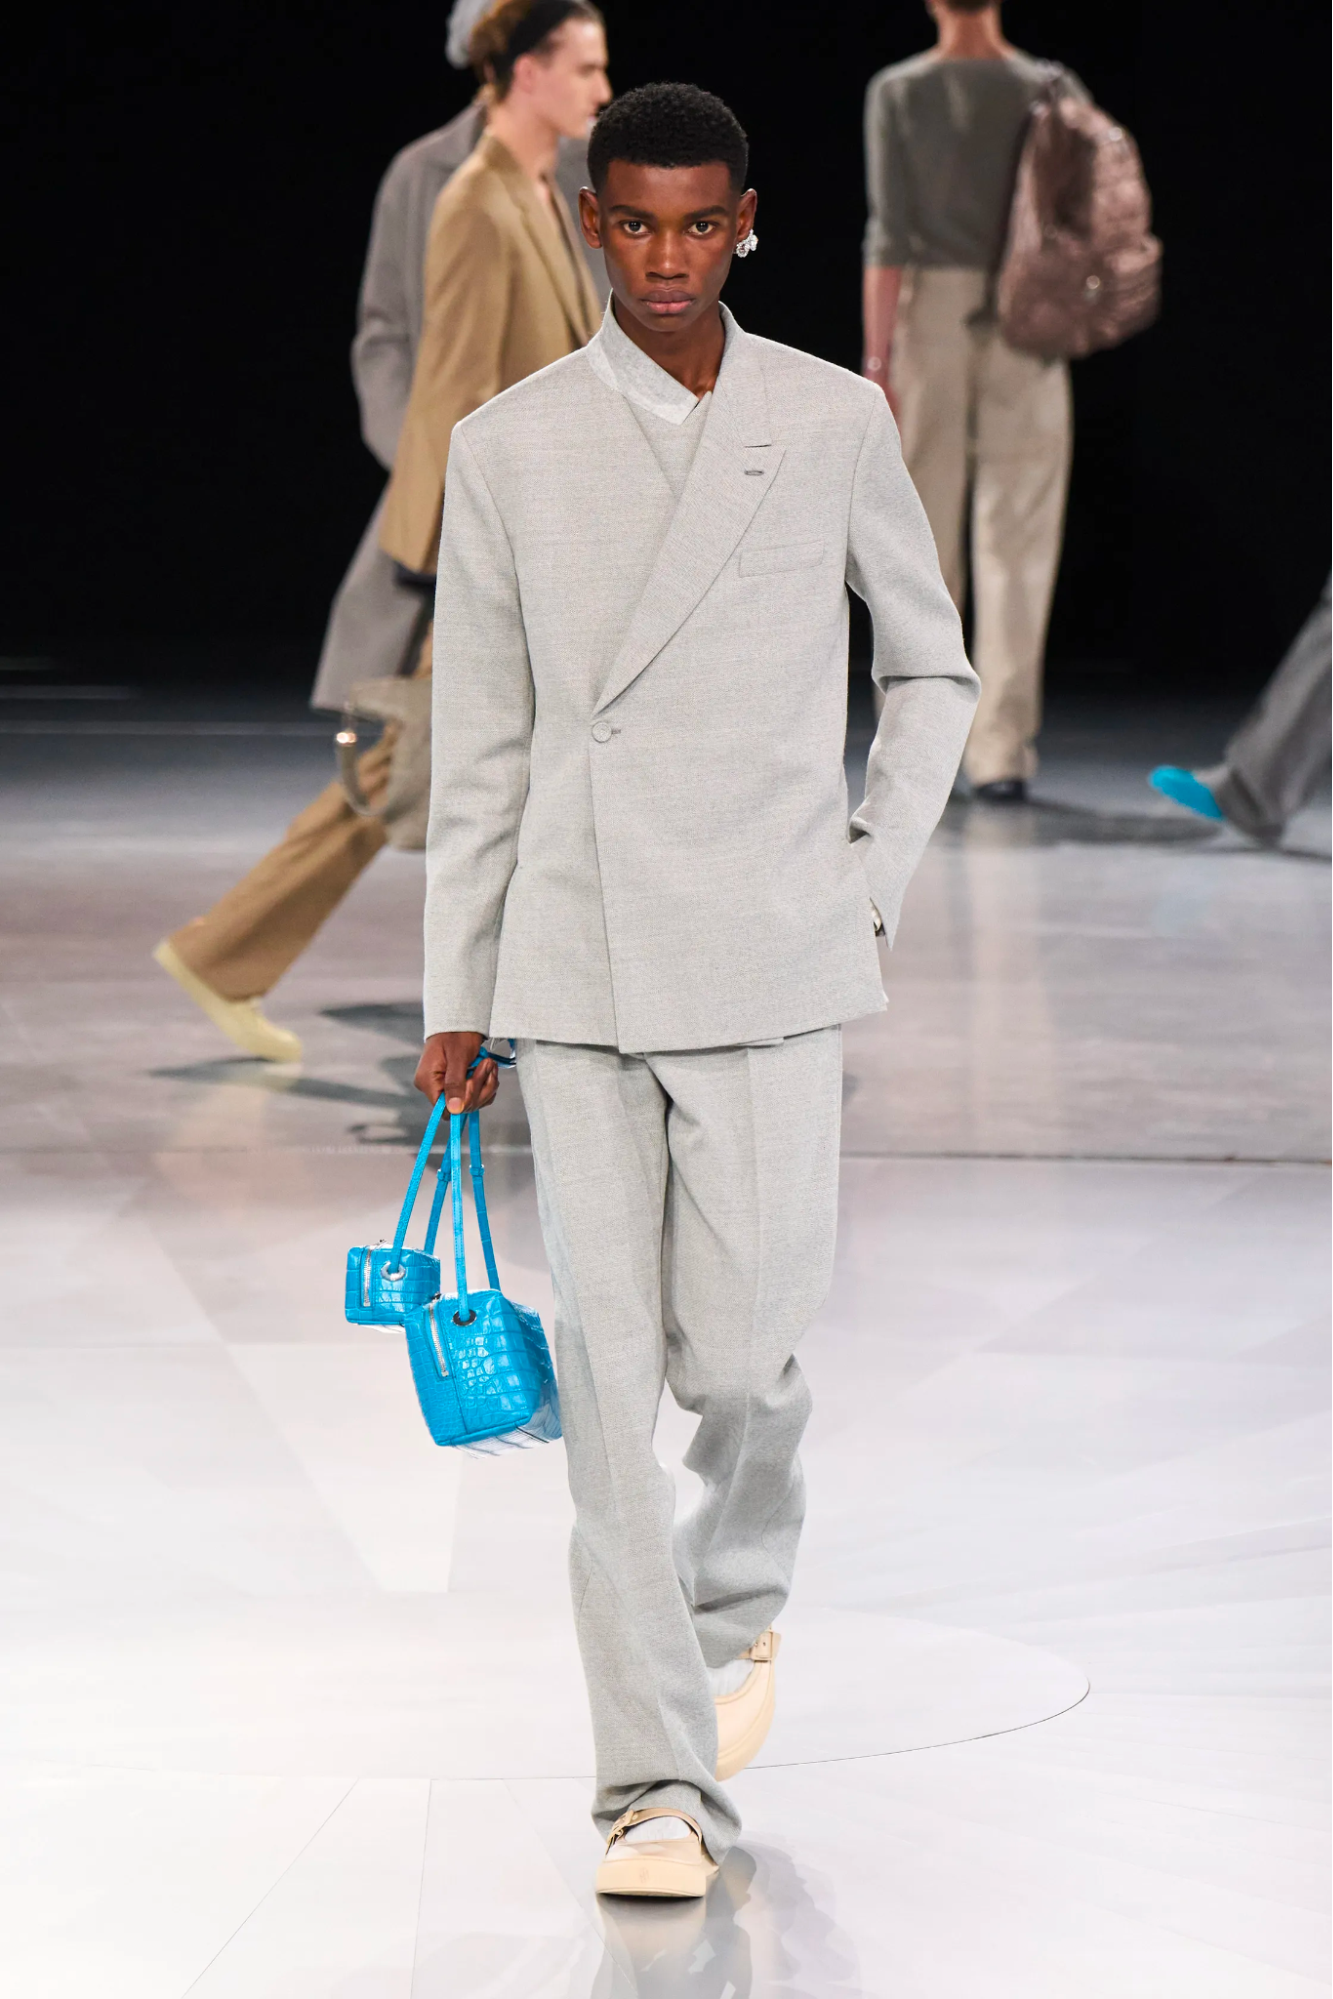 Kim Jones capitalizes on the preference for business attire among Dior's clientele. Photo: Dior
